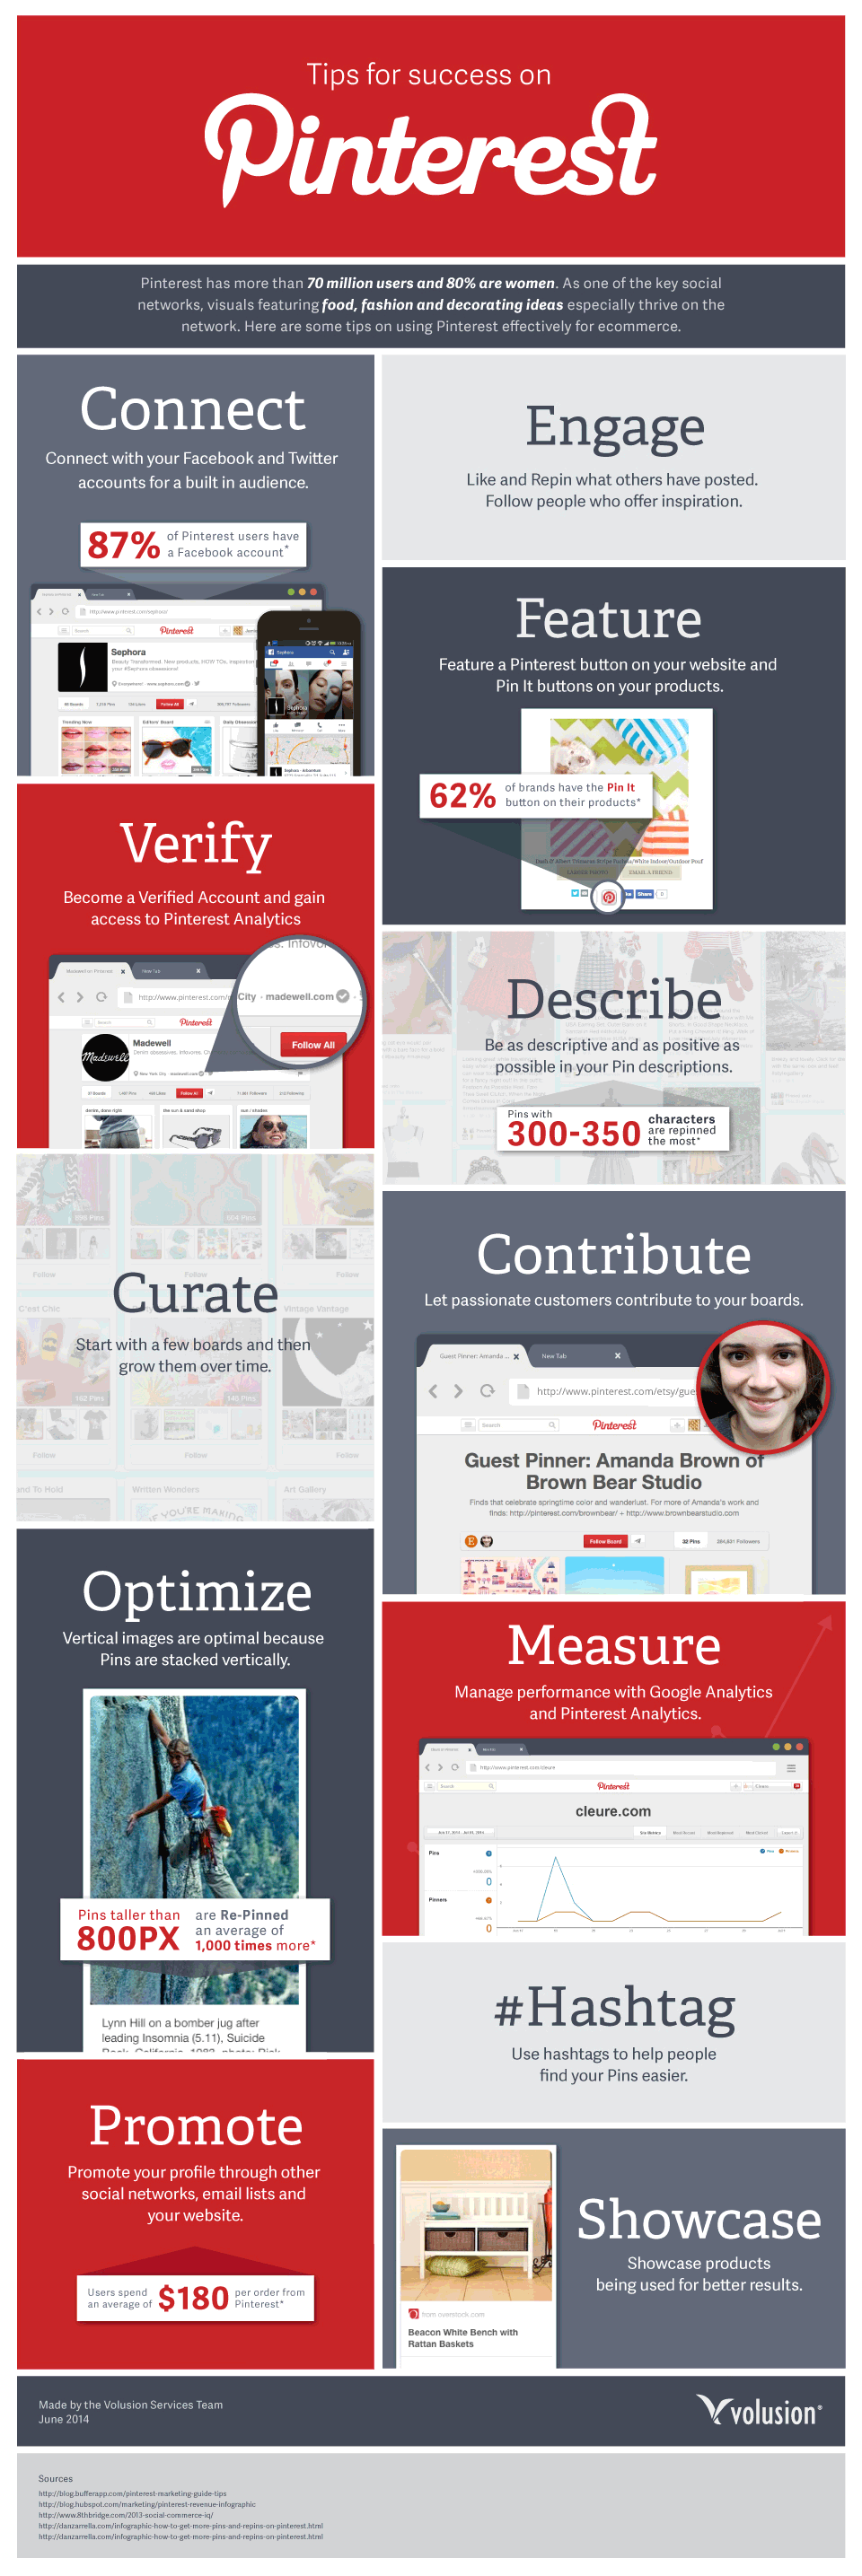 Cultivate Your Audience And Drive Engagement on #Pinterest - #infographic #socialmedia